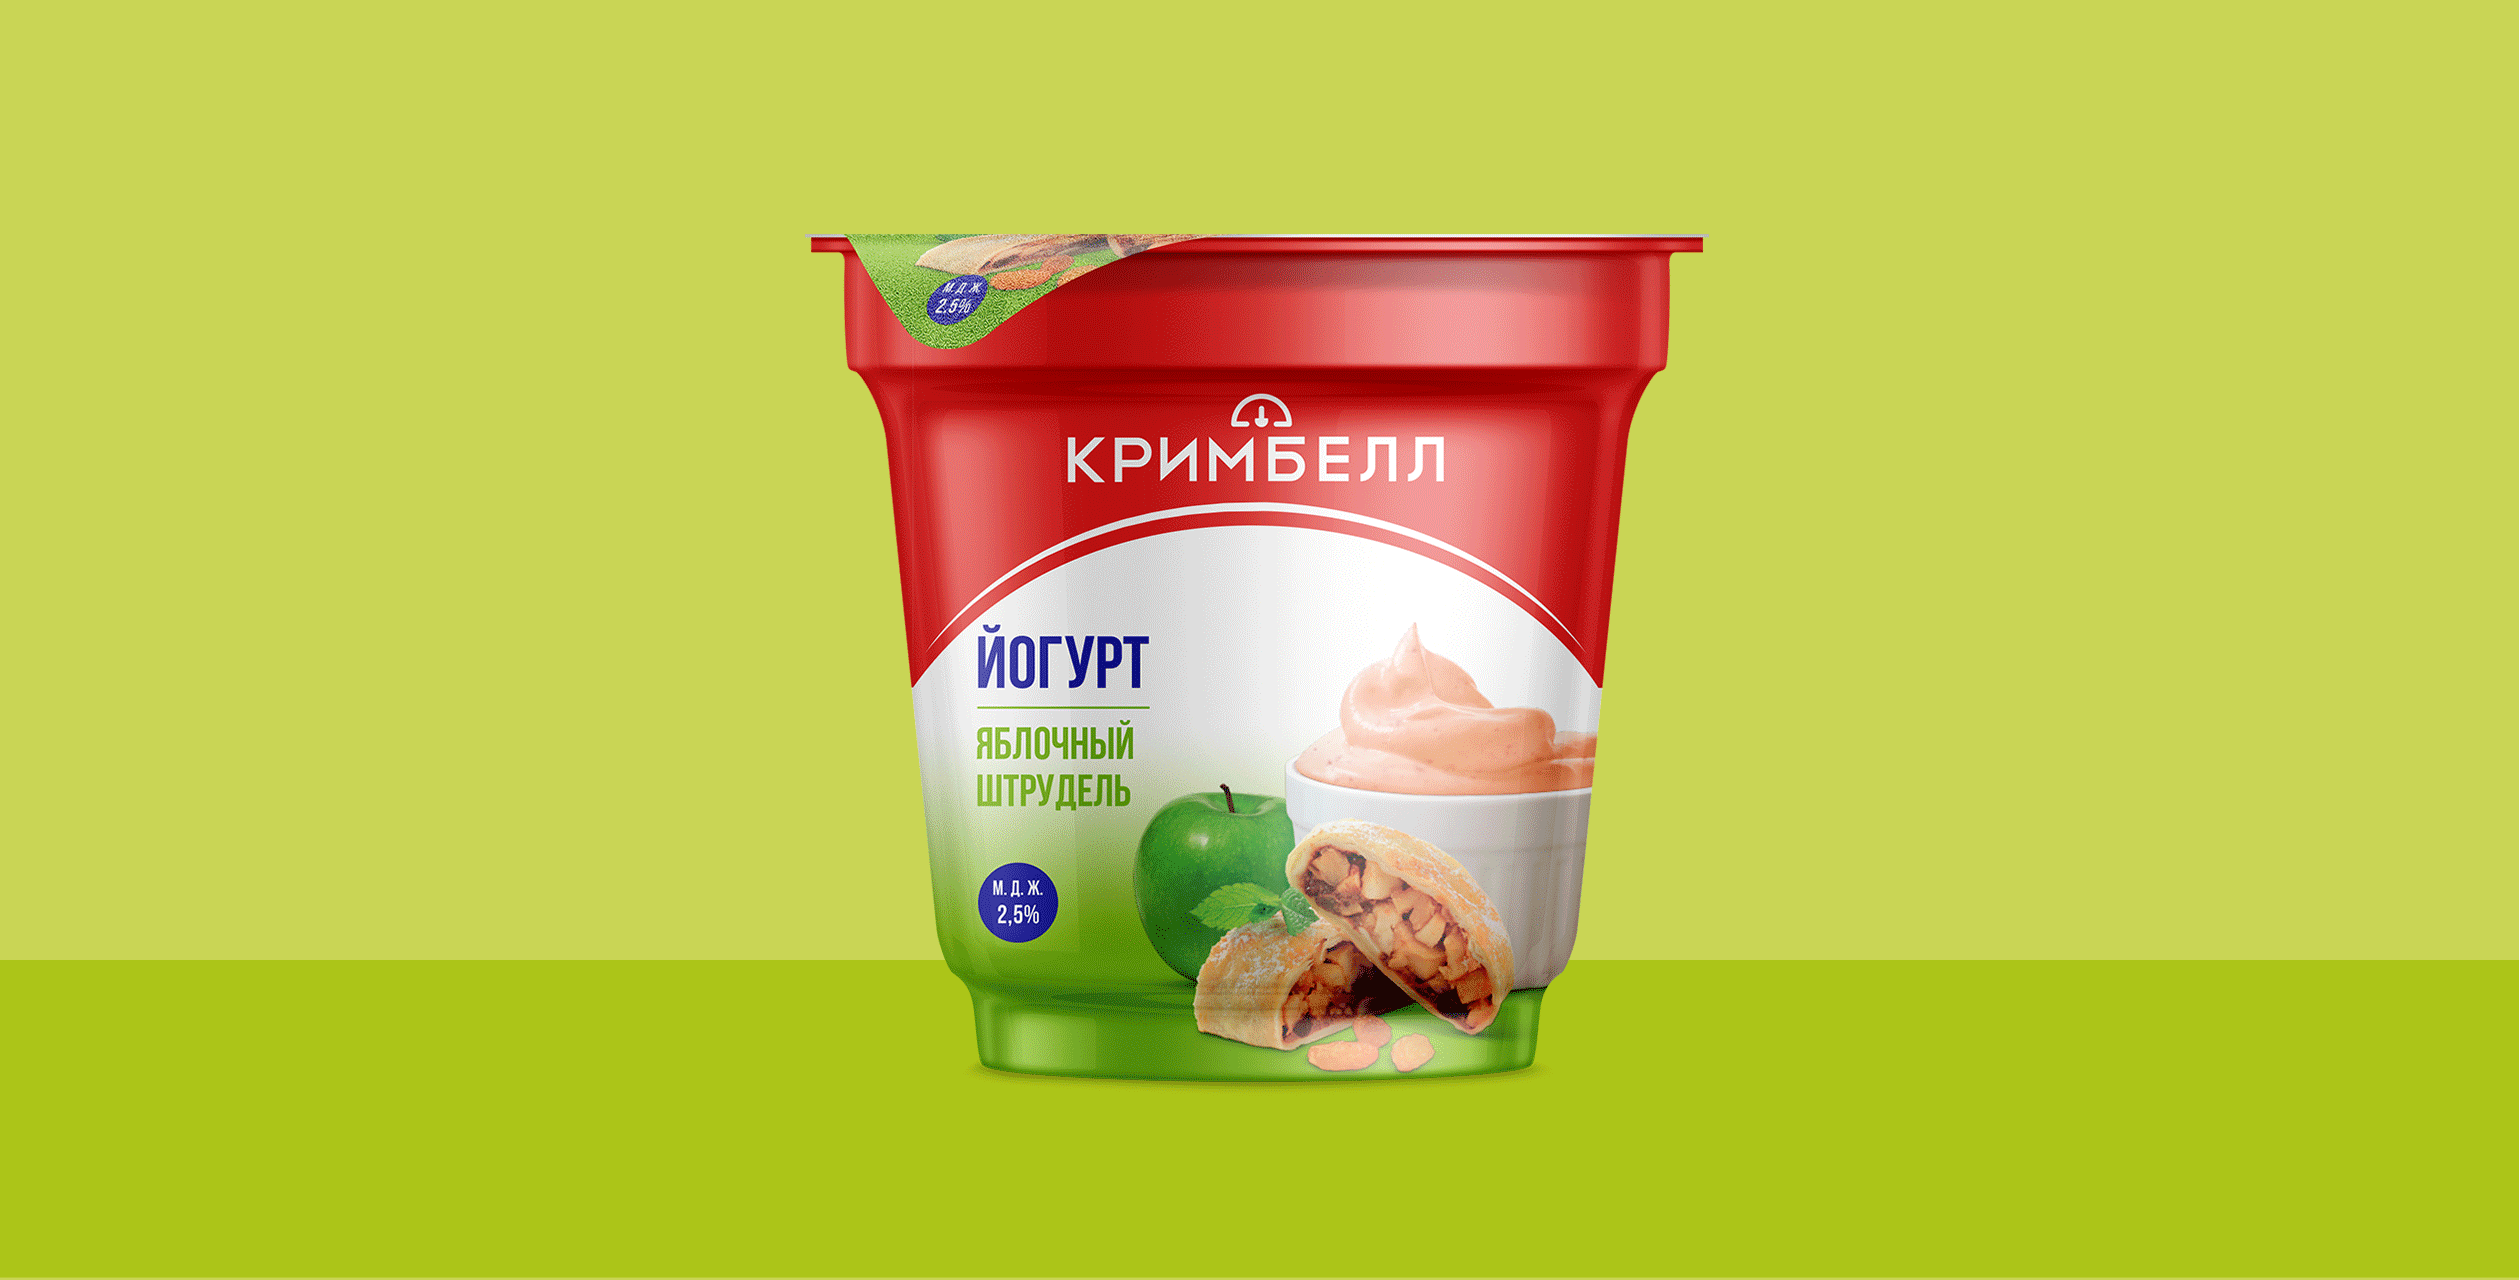 7. Creambell-Russia Dairy